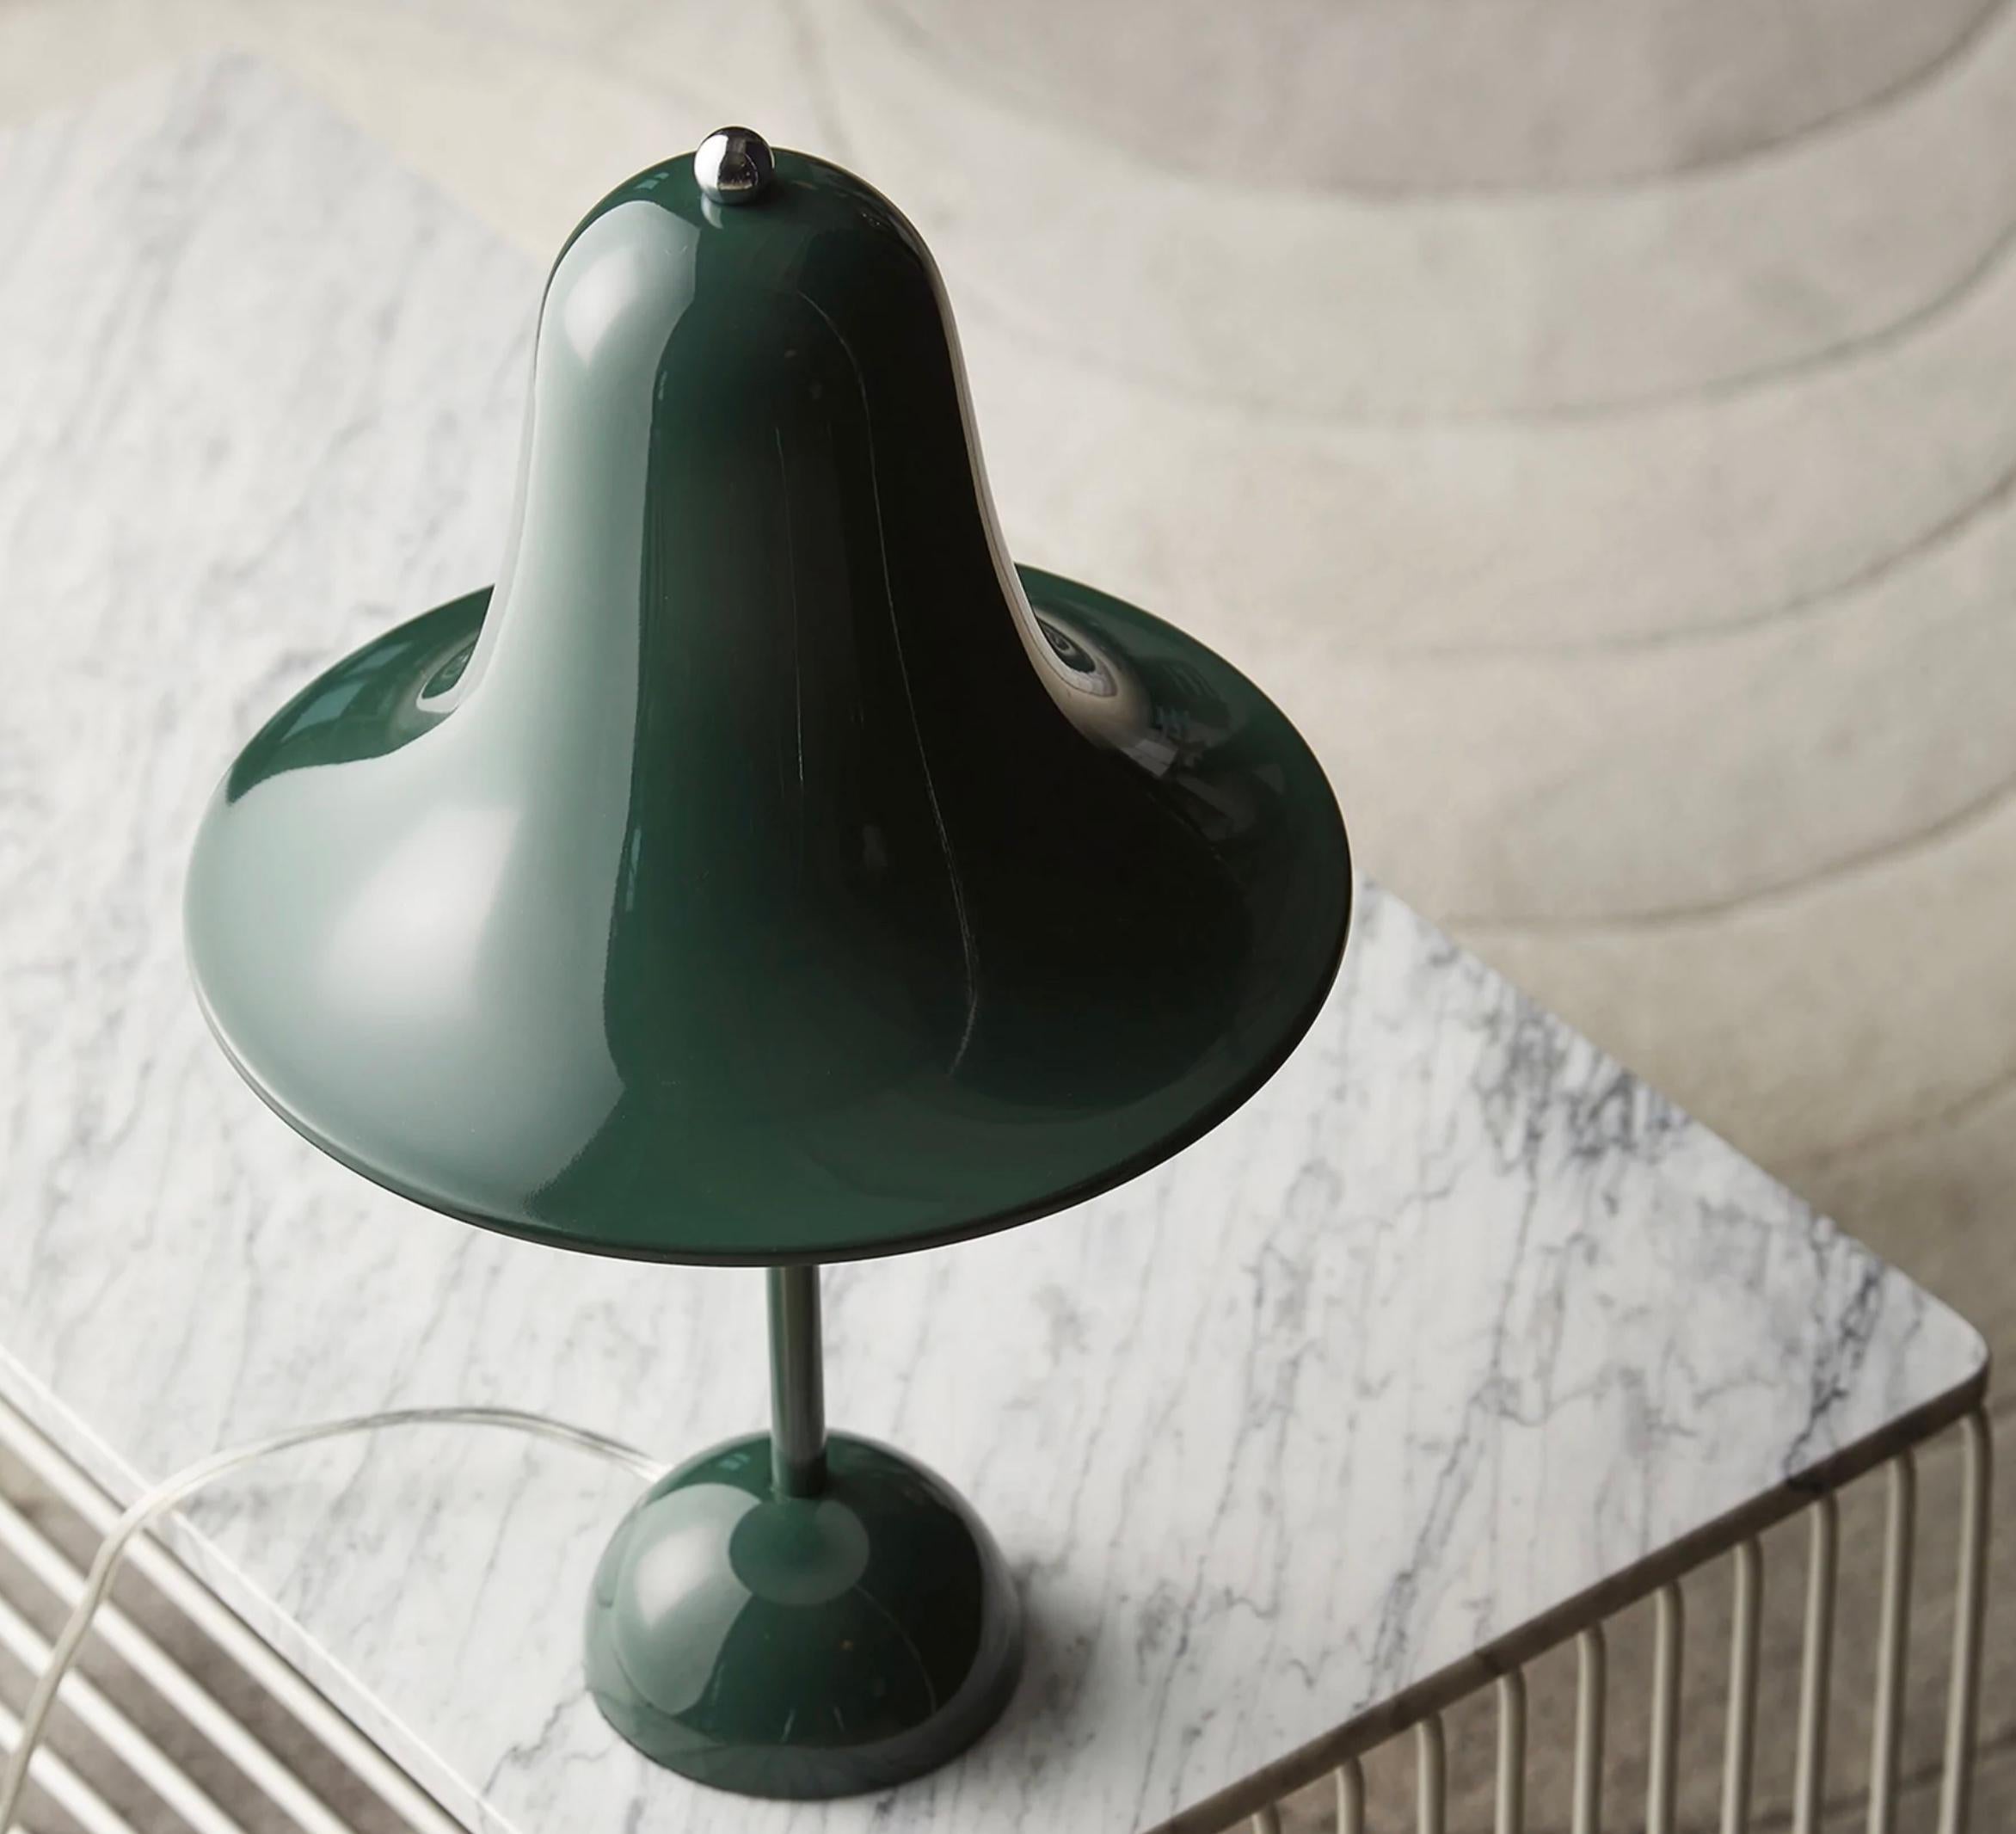 Verner Panton 'Pantop' Table Lamp in 'Dark Green' for Verpan. Designed in 1980. New, current production.

The elegant Pantop line was designed by Verner Panton in 1980, and has for a long time been a staple of the Verpan collection. Pantop is